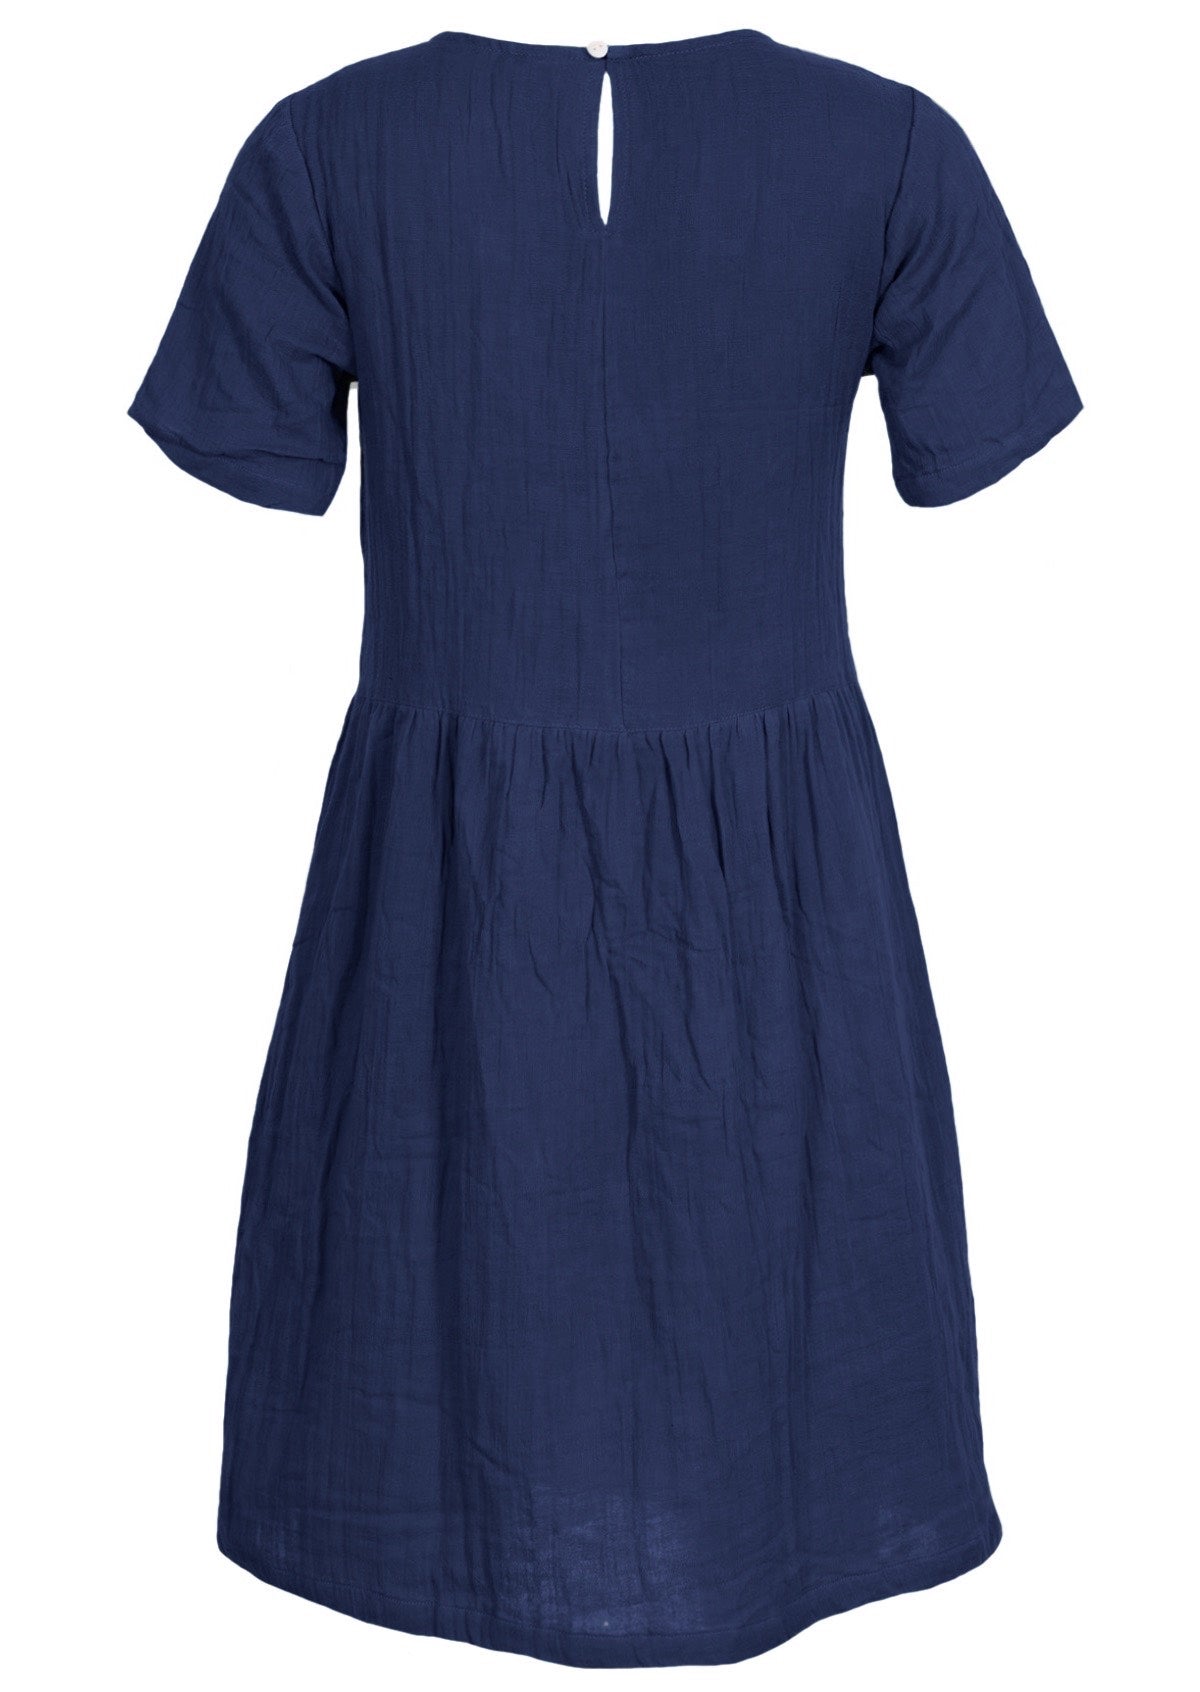 Double cotton short sleeve dress with button at nape of neck for ease when dressing